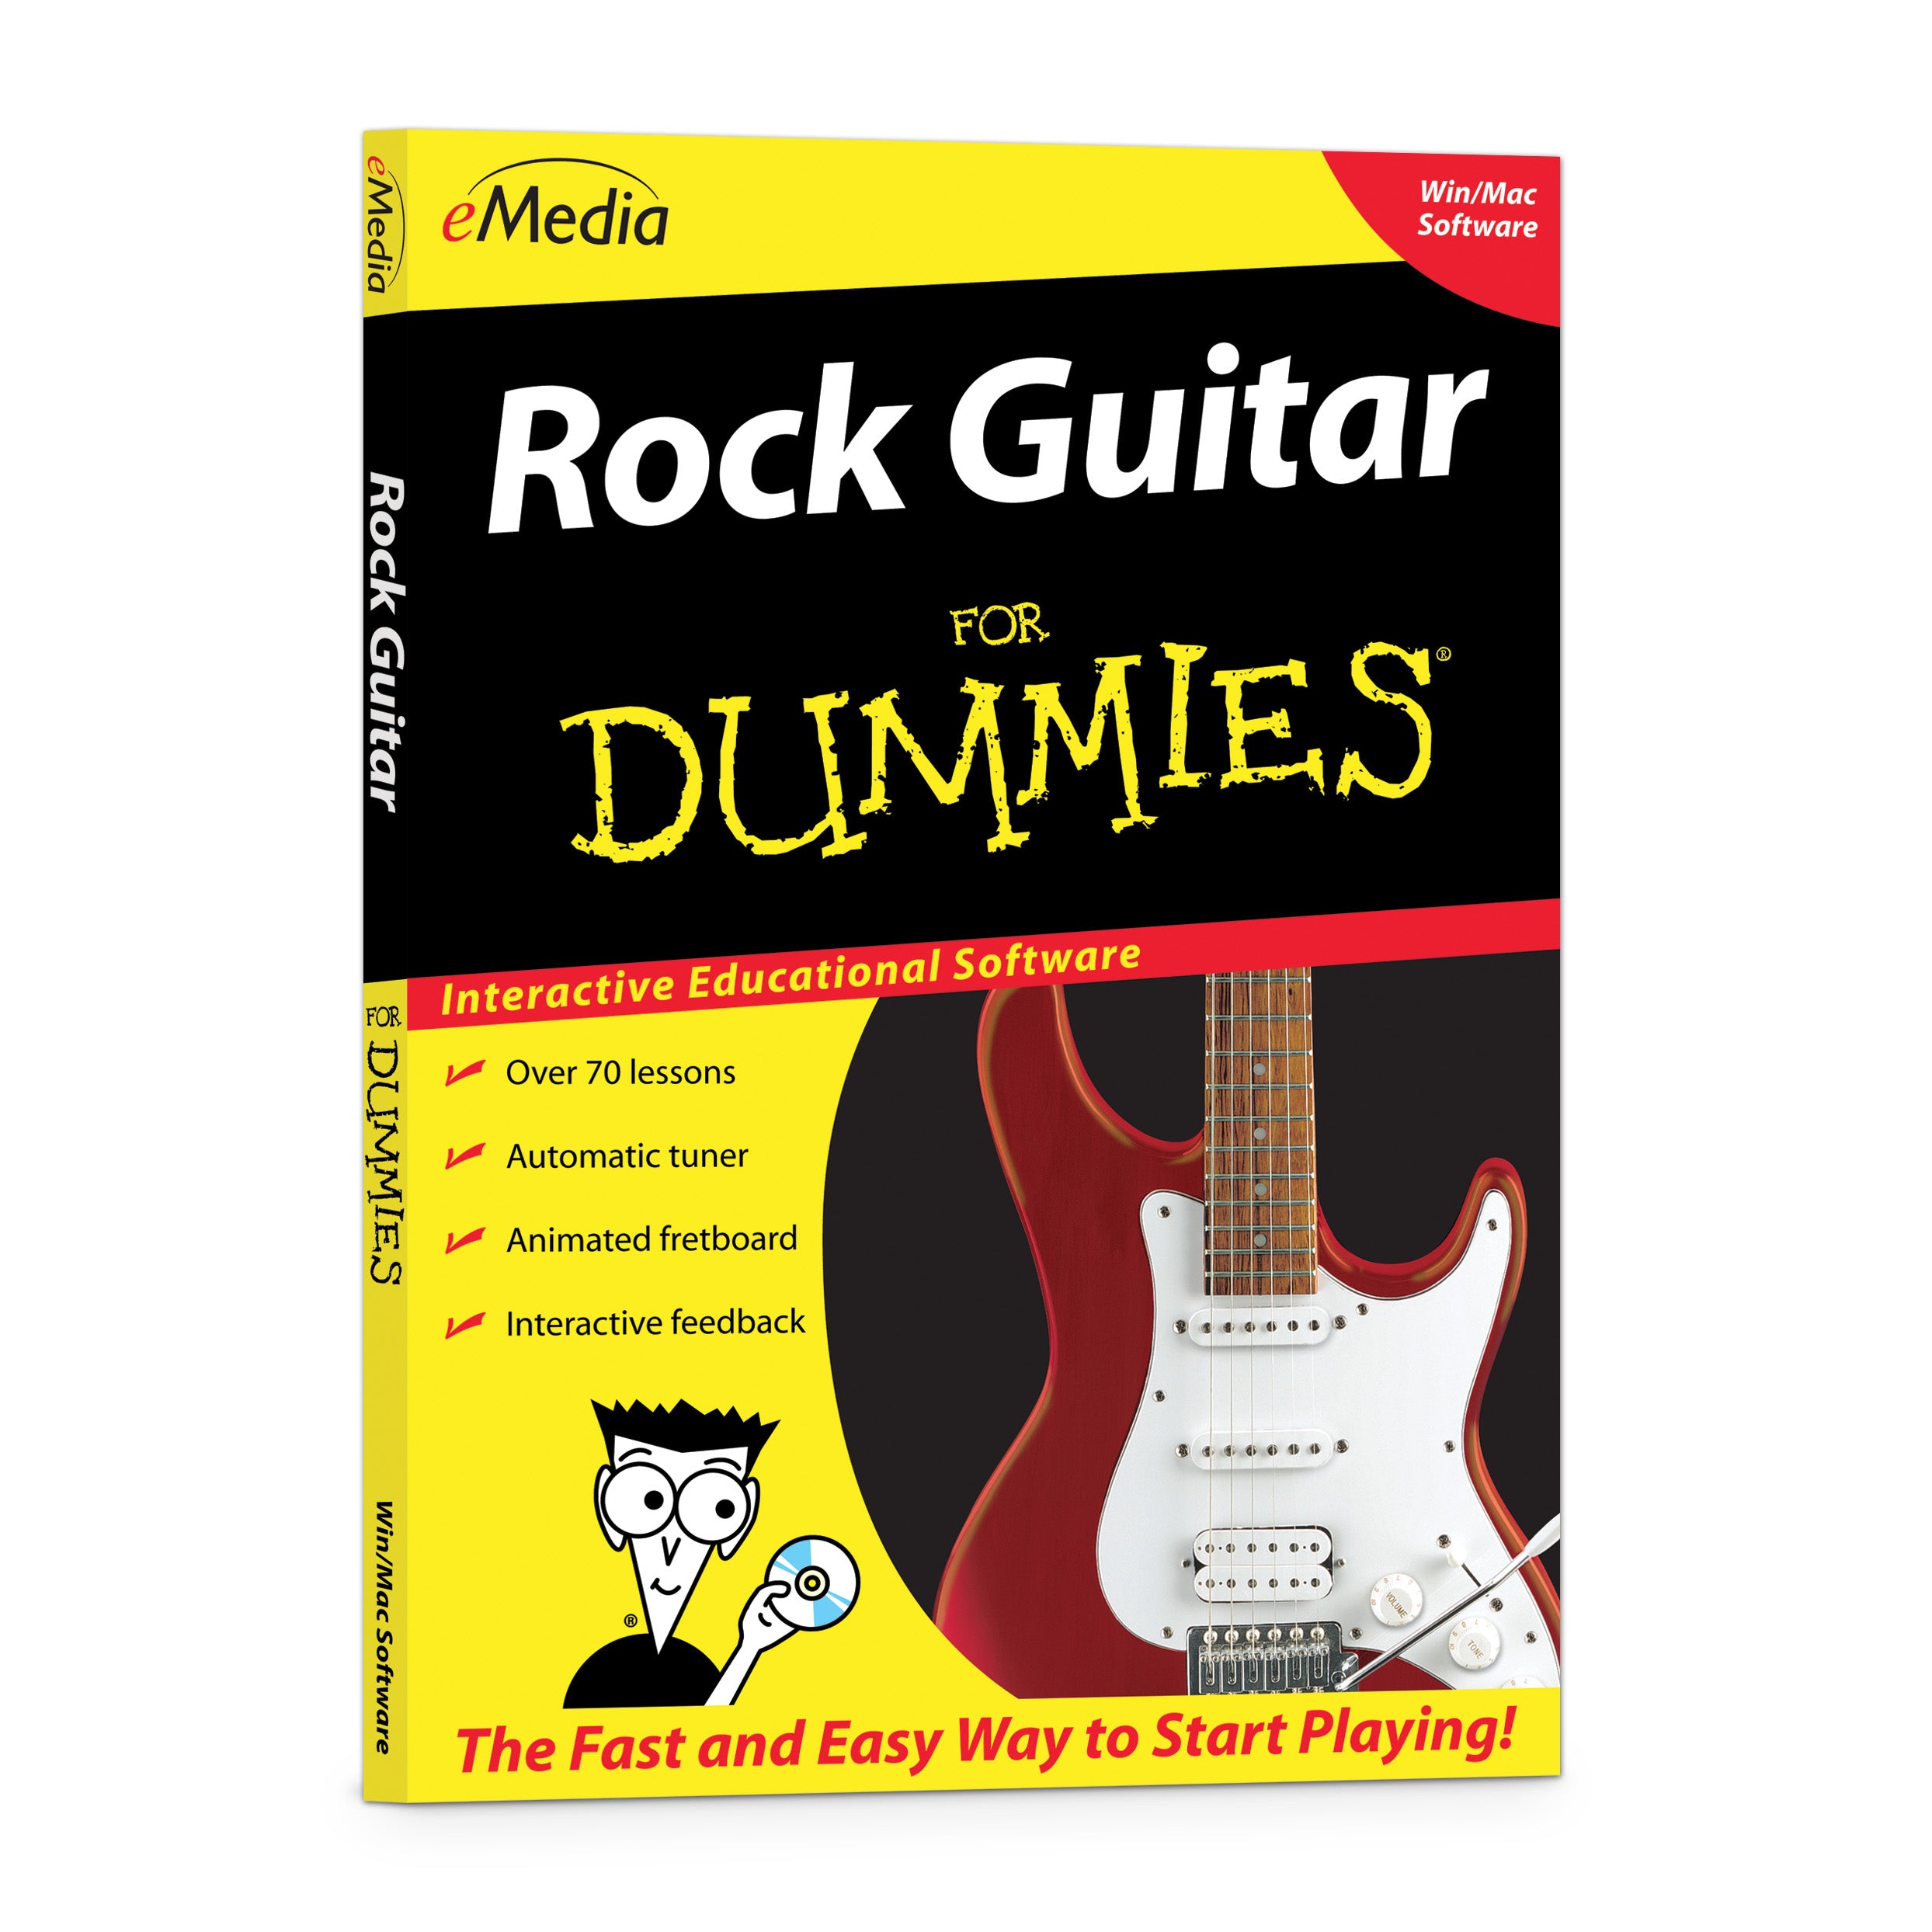 Basic Rock Guitar Lessons - power chords, riffs and more. – eMedia ...